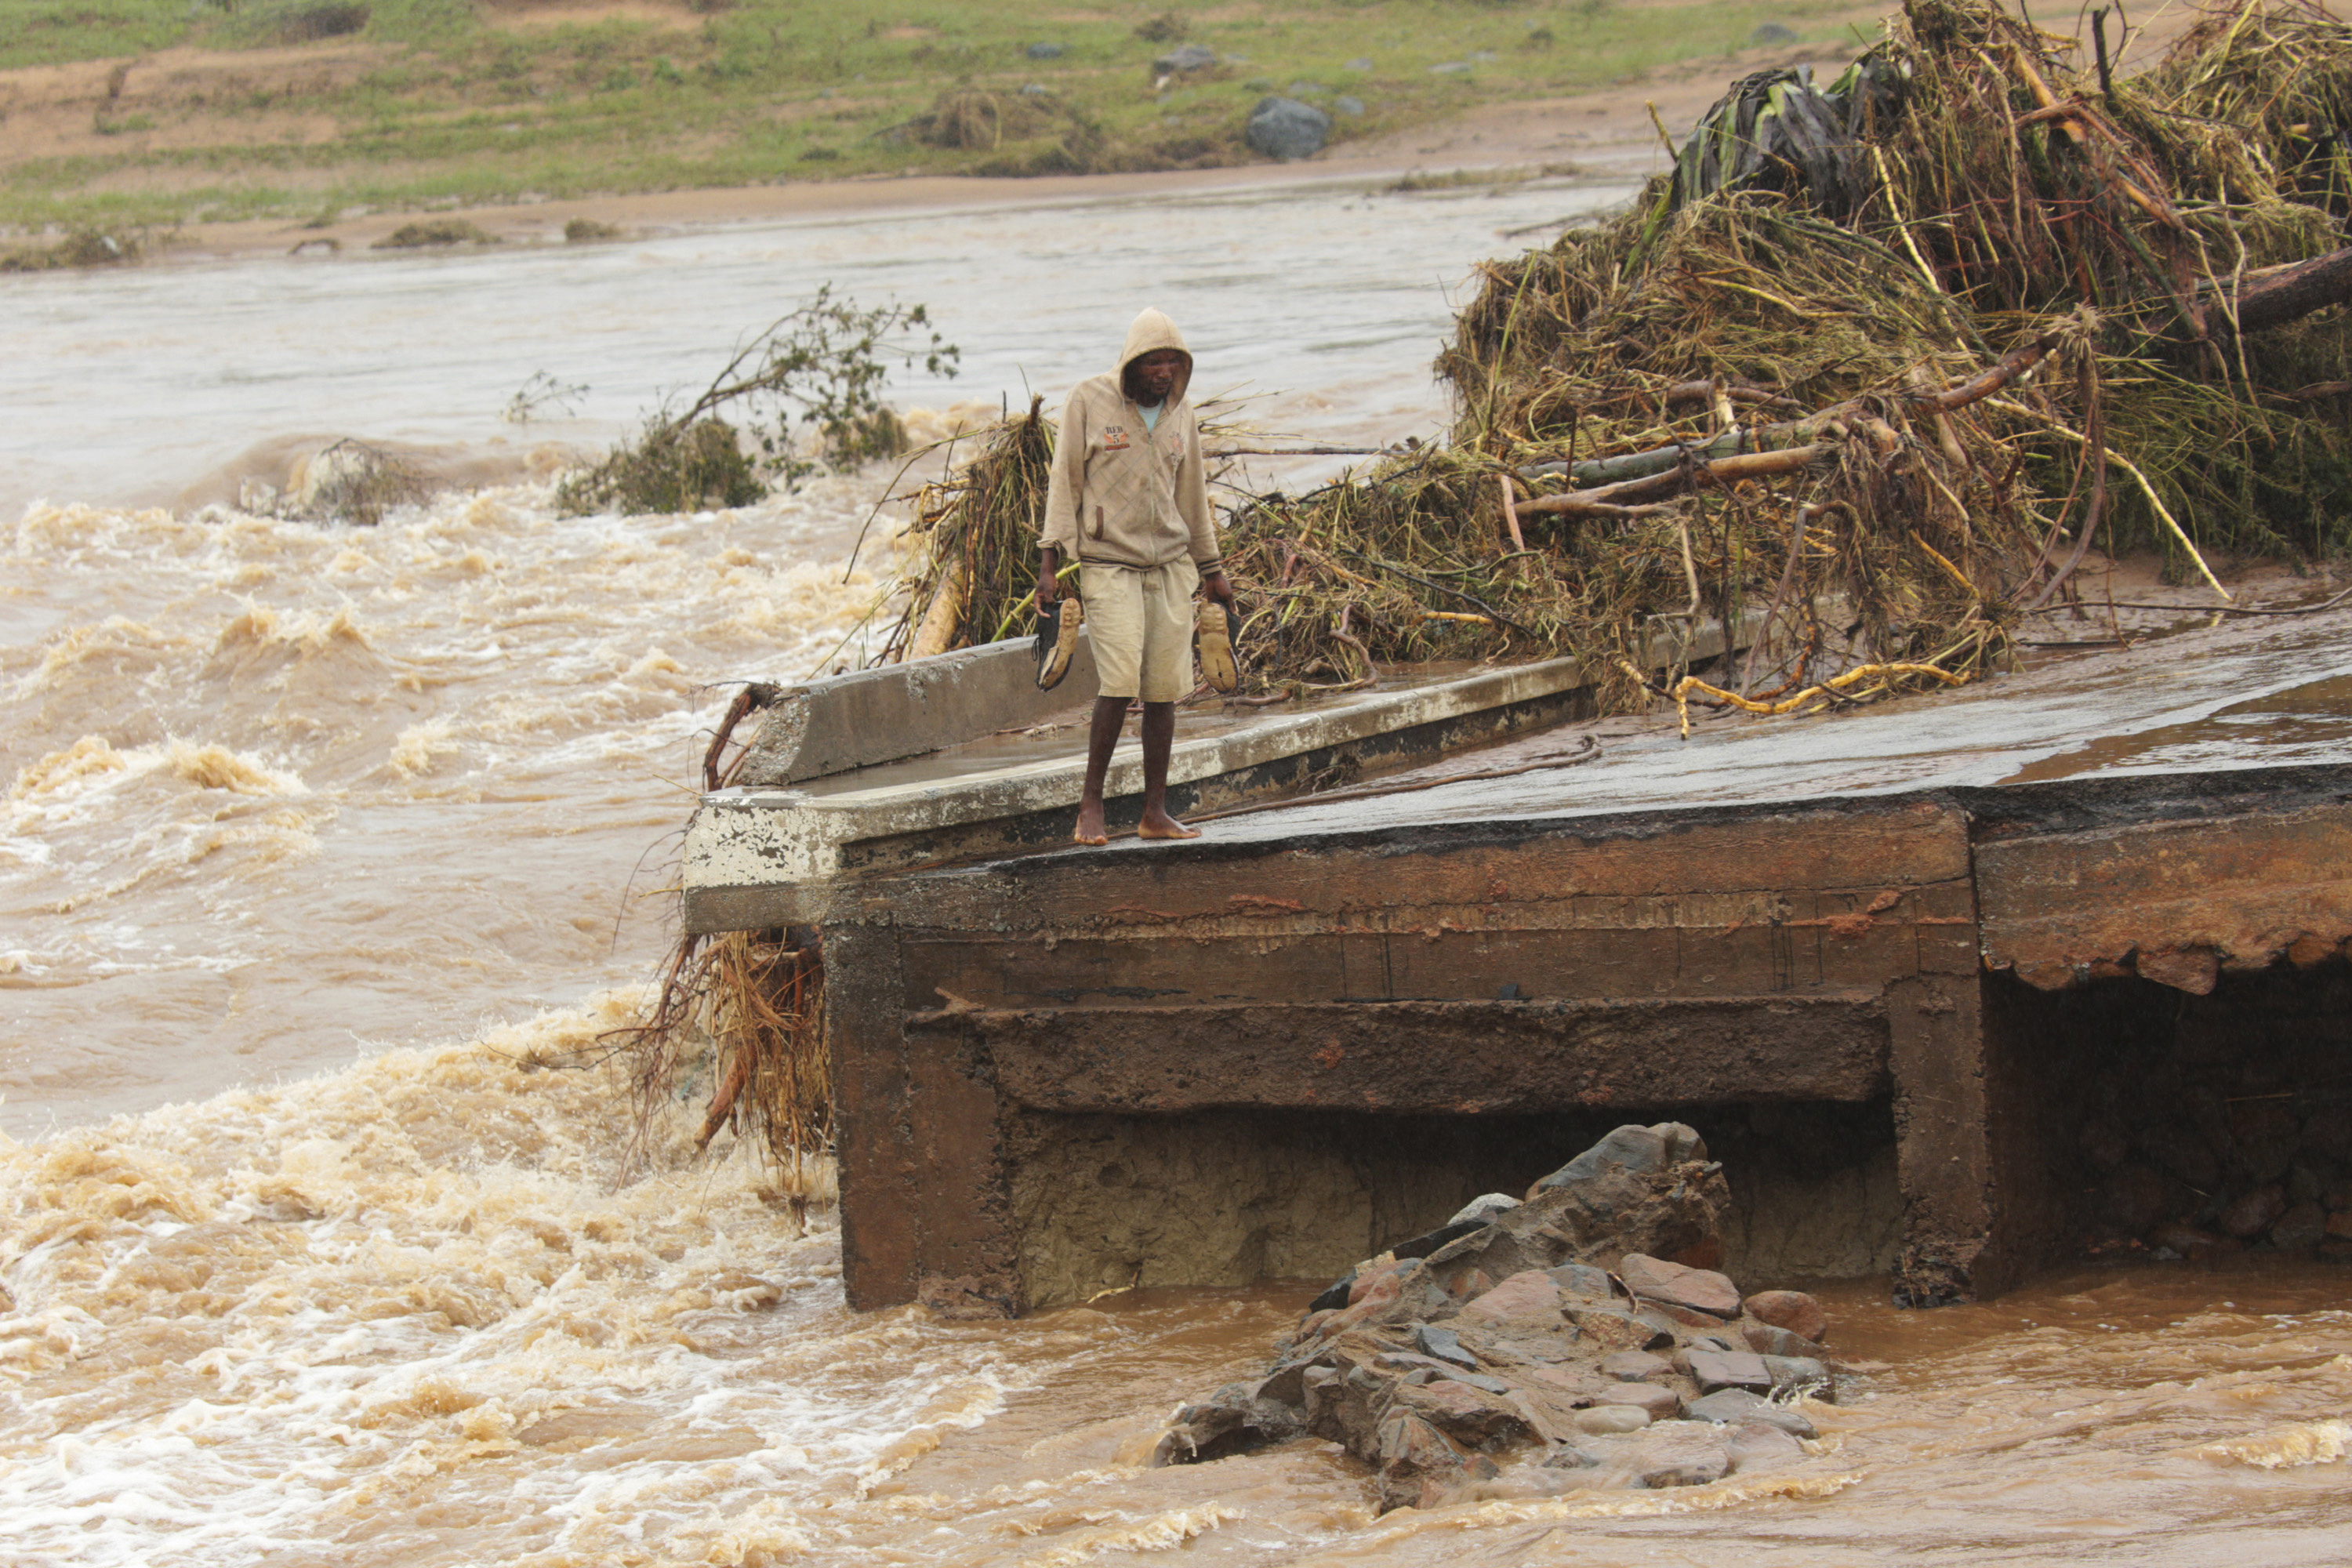 A man stands on the edge of a collapsed bridge in Chimanimani, about 600km south east of Harare, Zimbabwe